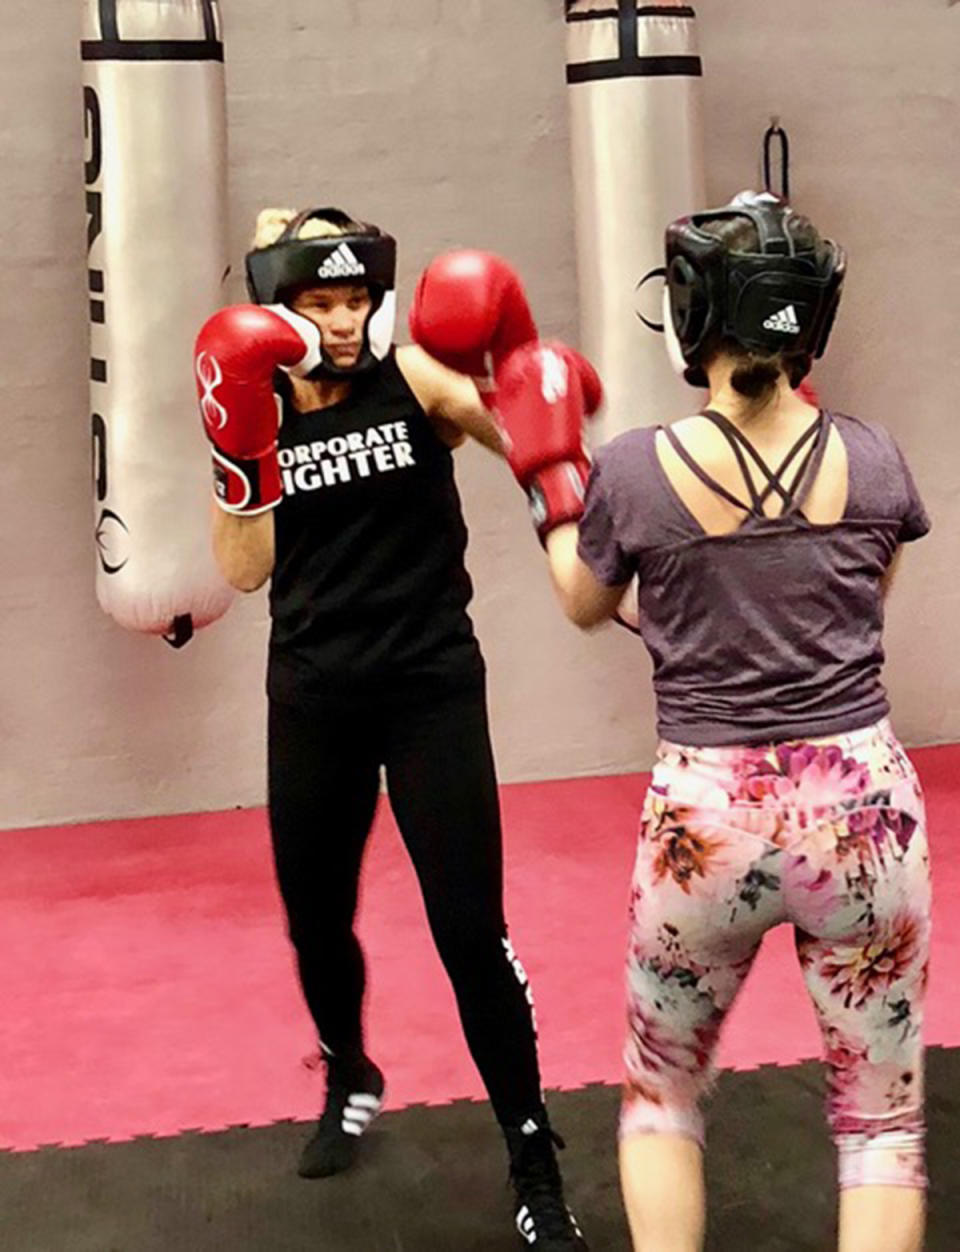 A photo of Sydney woman Maria boxing with another woman in a gym